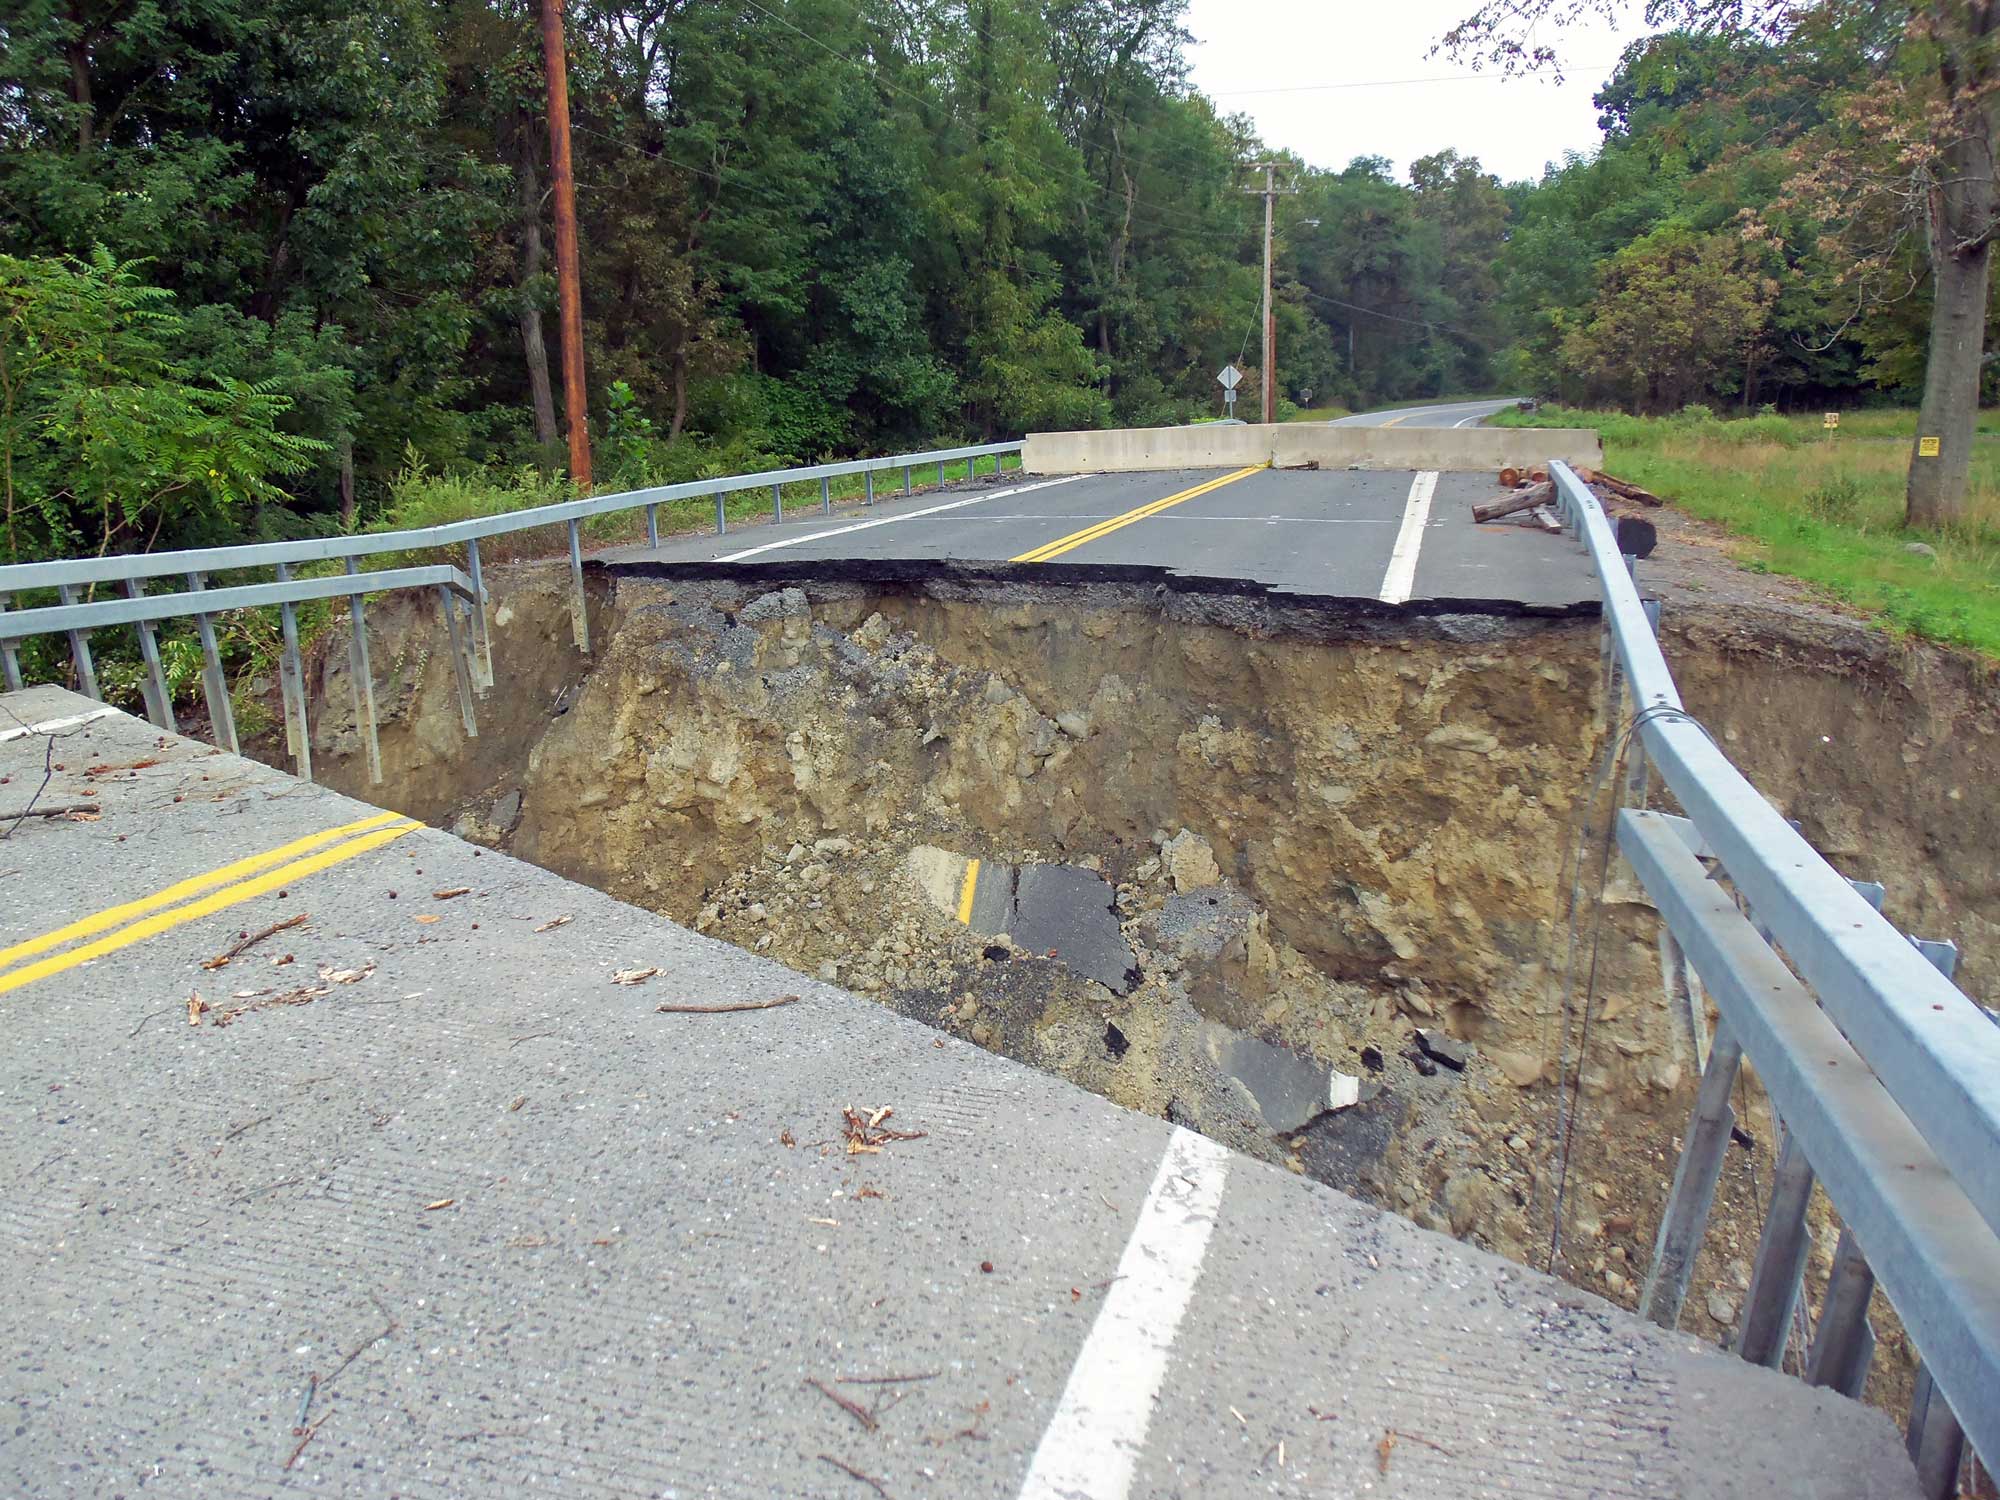 Photograph of a bridge that was washed out by flooding in Moodna Creek, New York. The photo shows a two-lane paved road with a segment missing. The photo is looking from one edge of the missing segment to the other. Dirt that supports the road can be seen on under the other side of the missing segment.